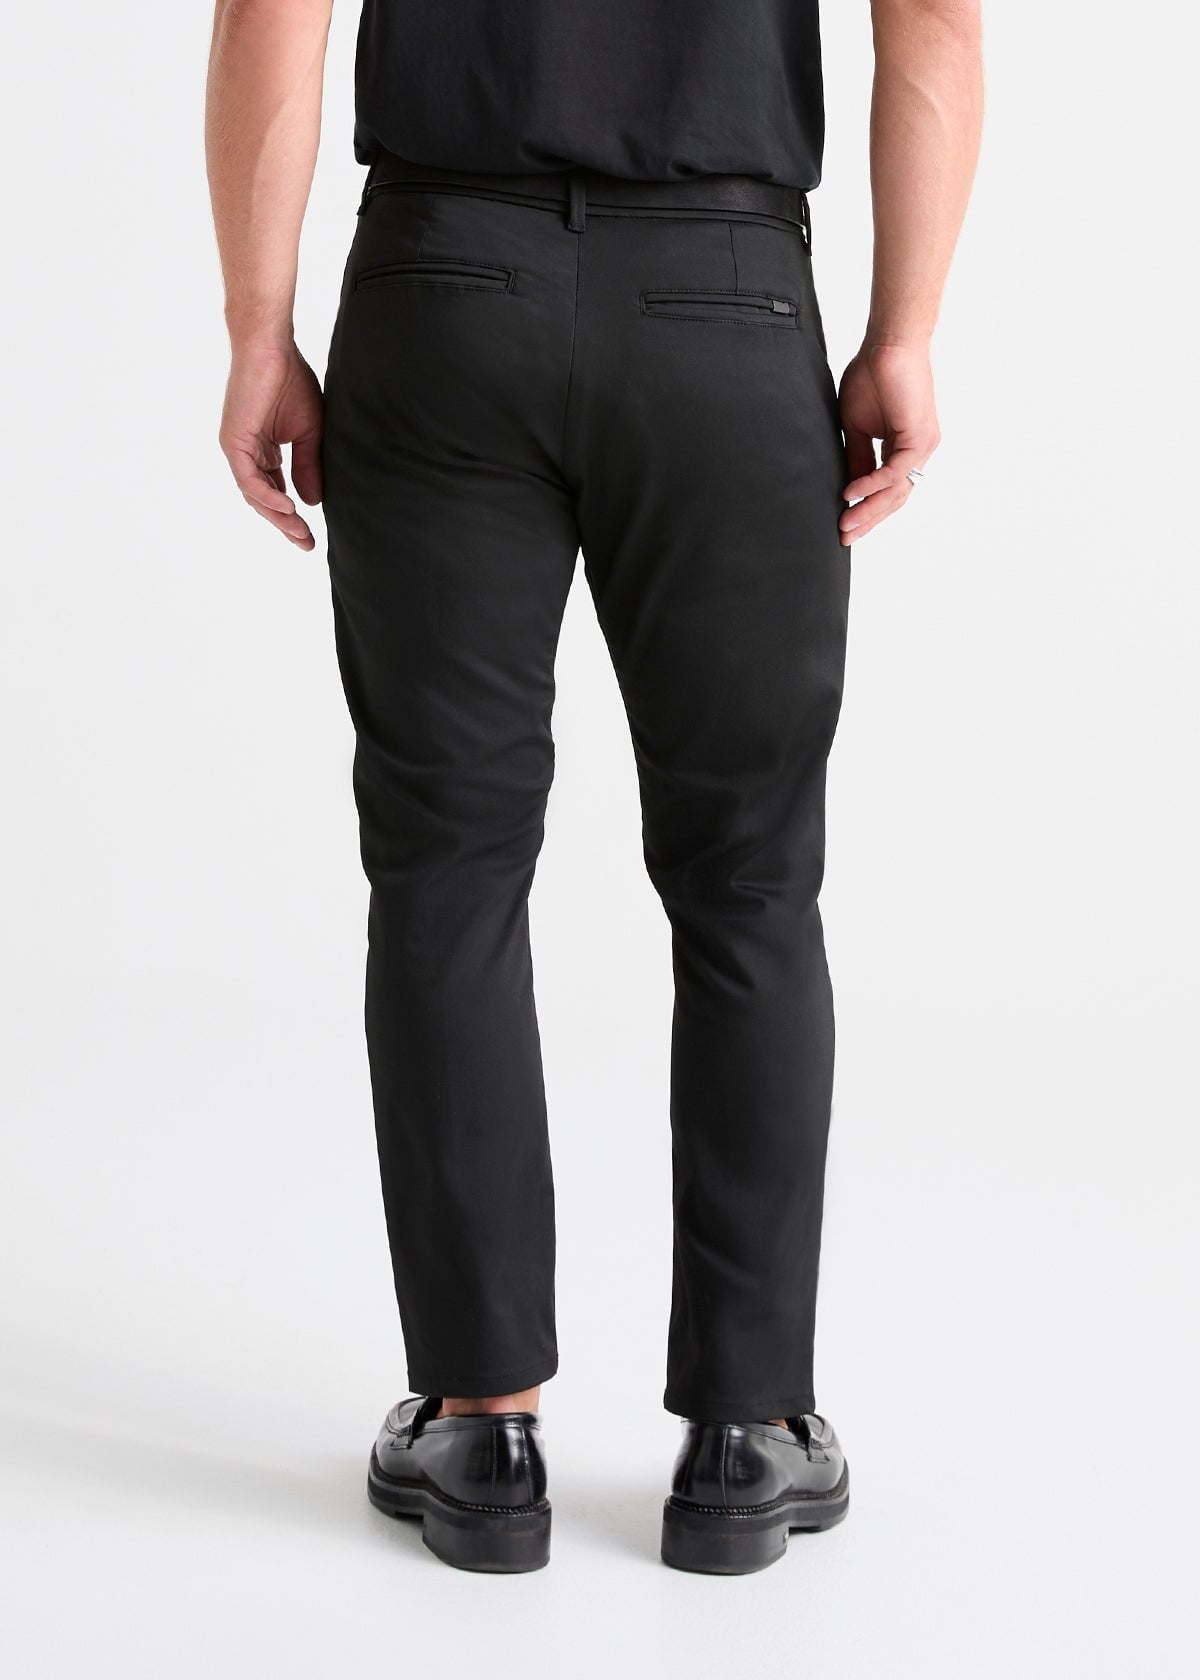 Men's Black Relaxed Fit Stretch Dress Pant